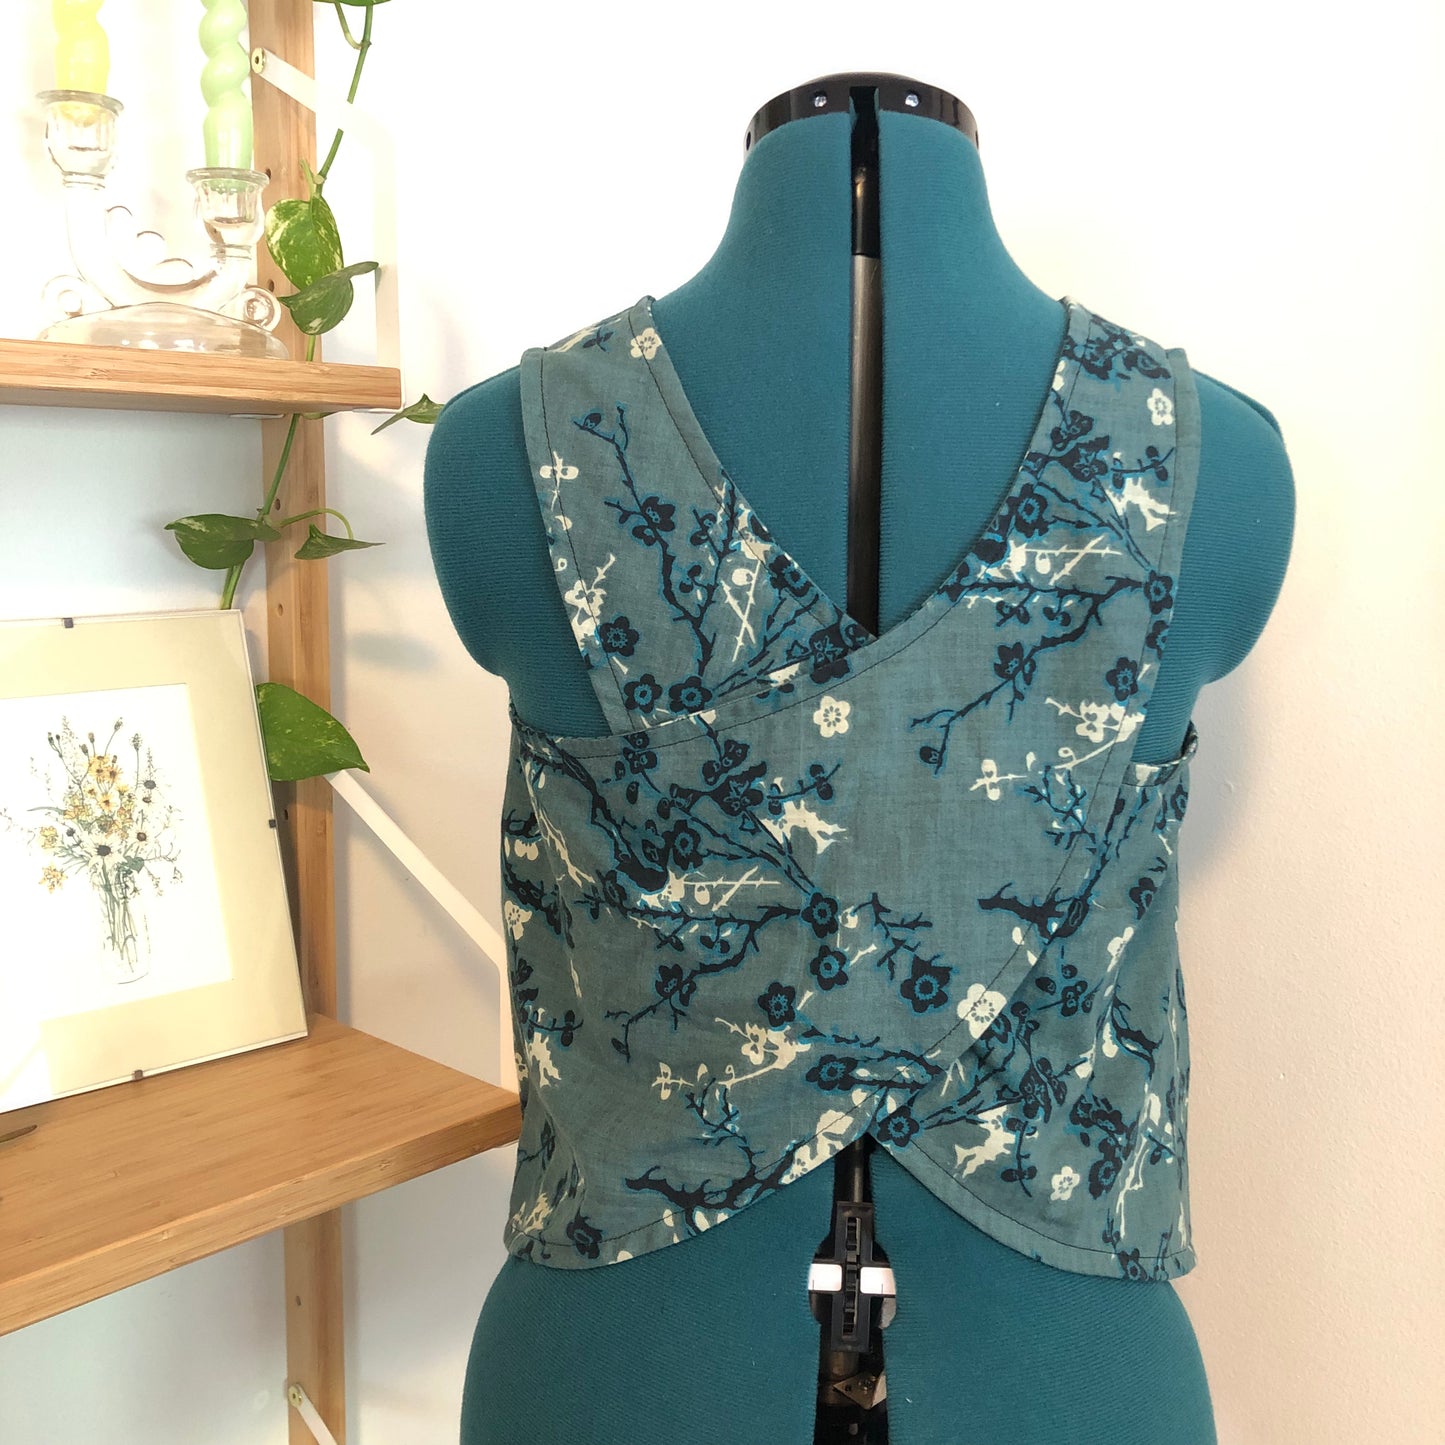 Size 0/2 - Everyday Crop Cross-back Tank (Blossoms)